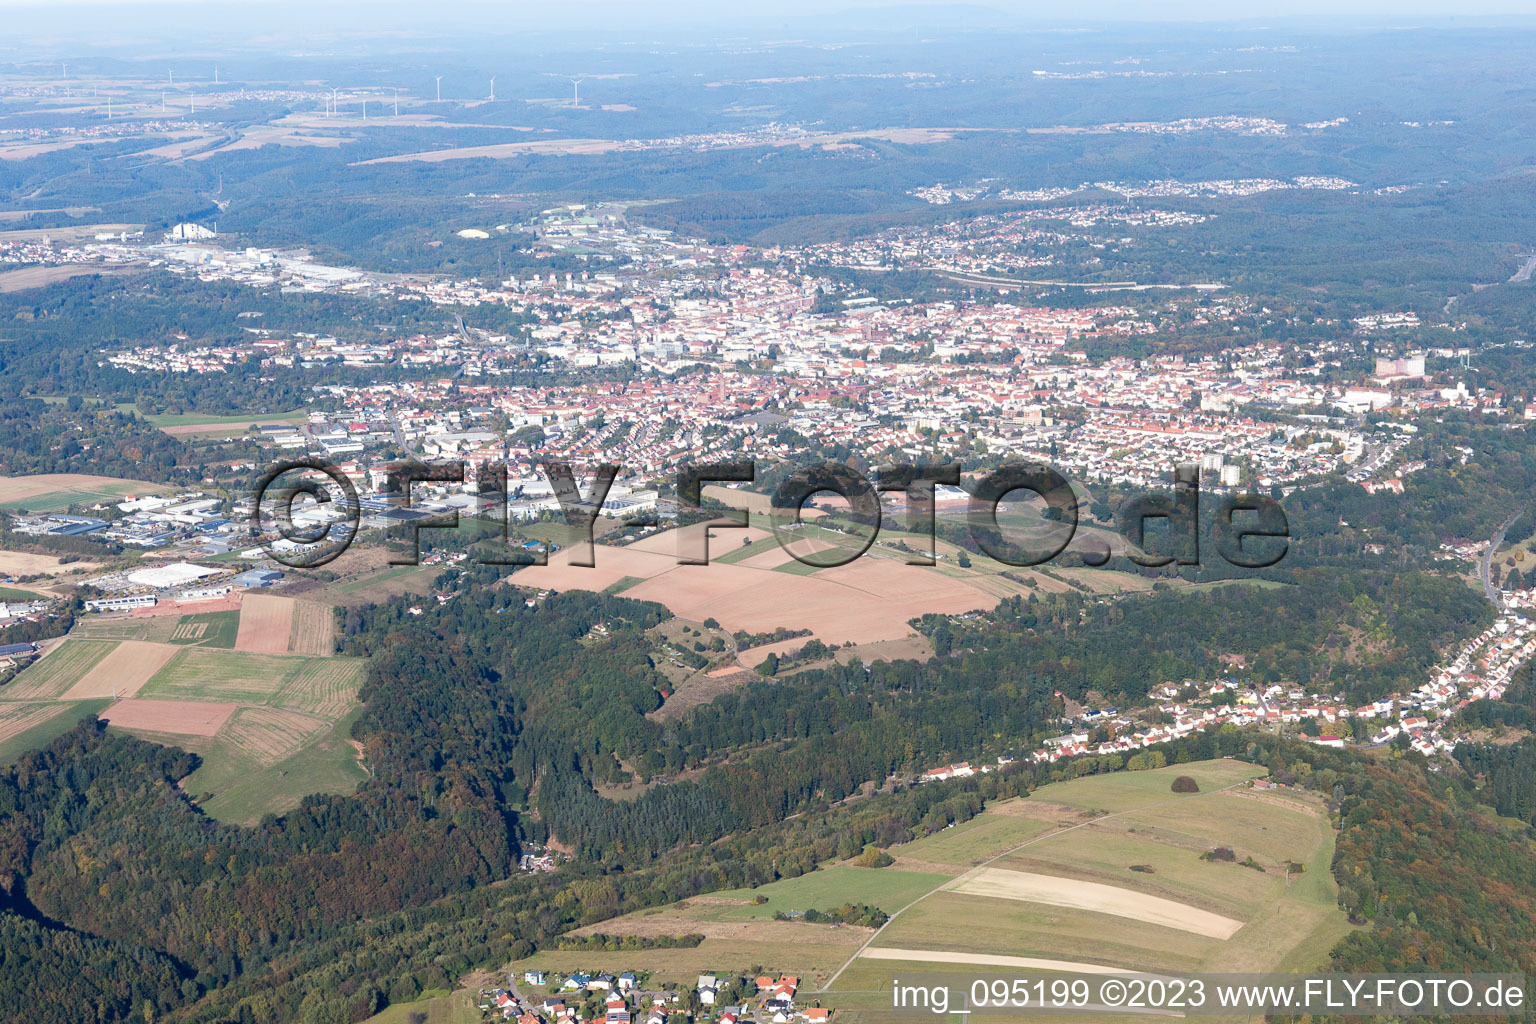 Aerial view of Obersimten in the state Rhineland-Palatinate, Germany